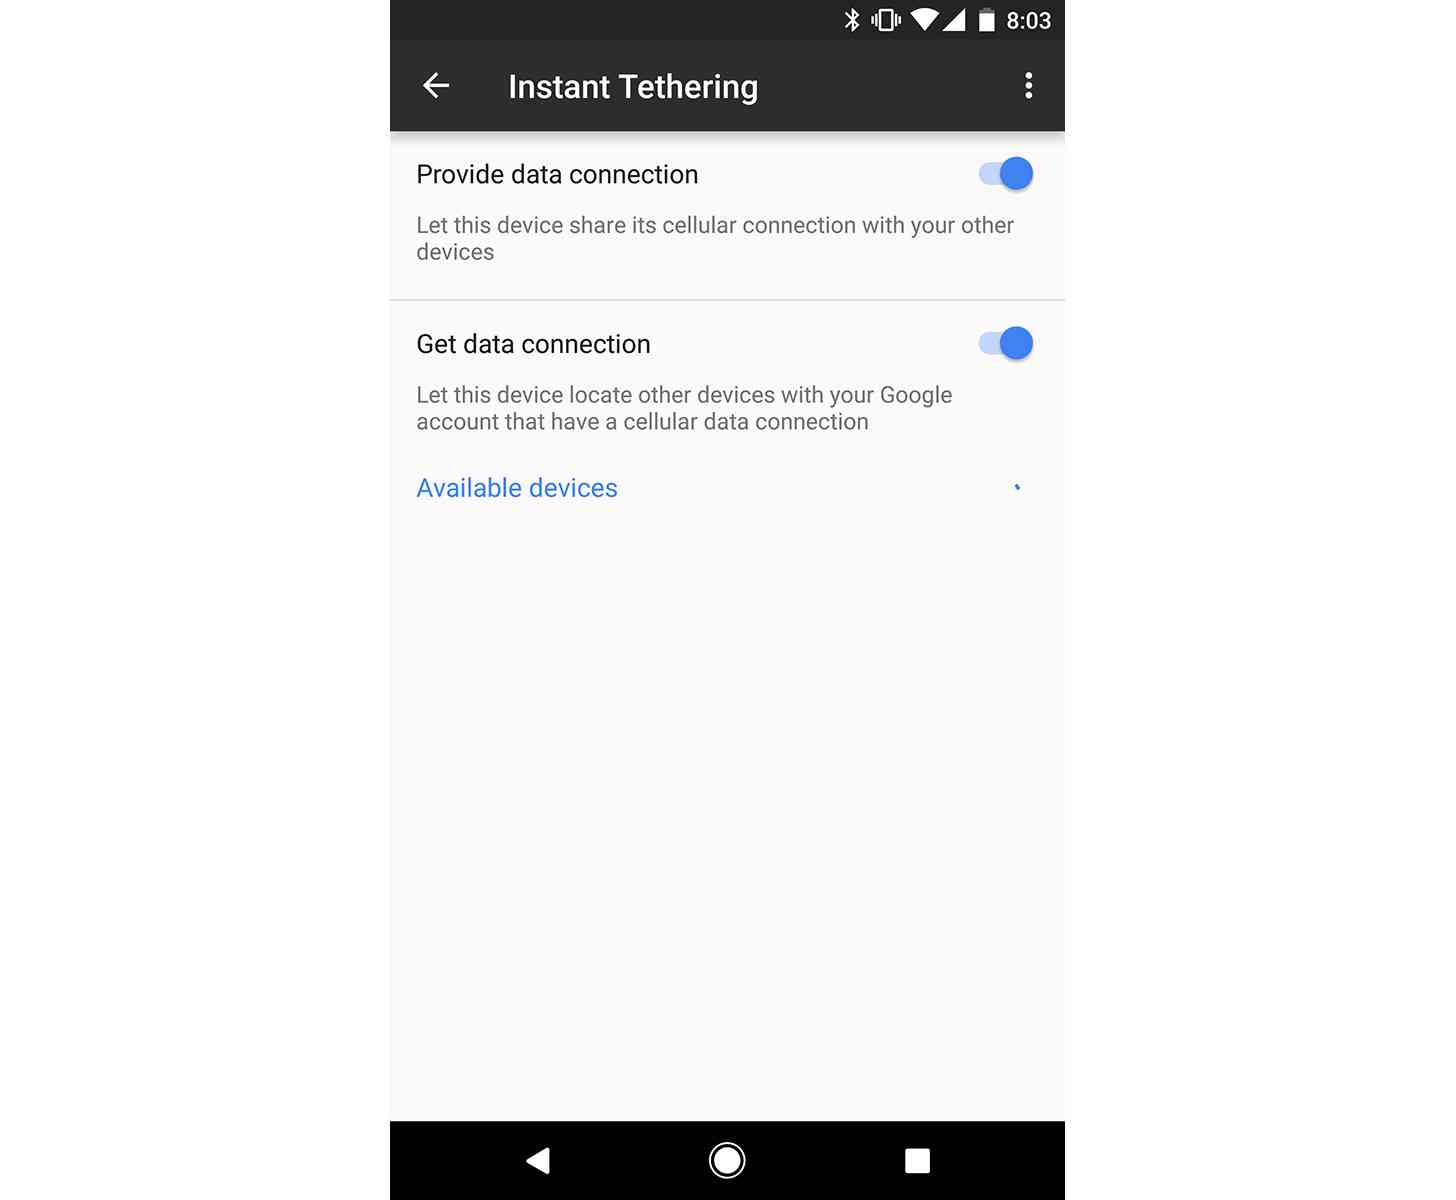 Google Instant Tethering feature official